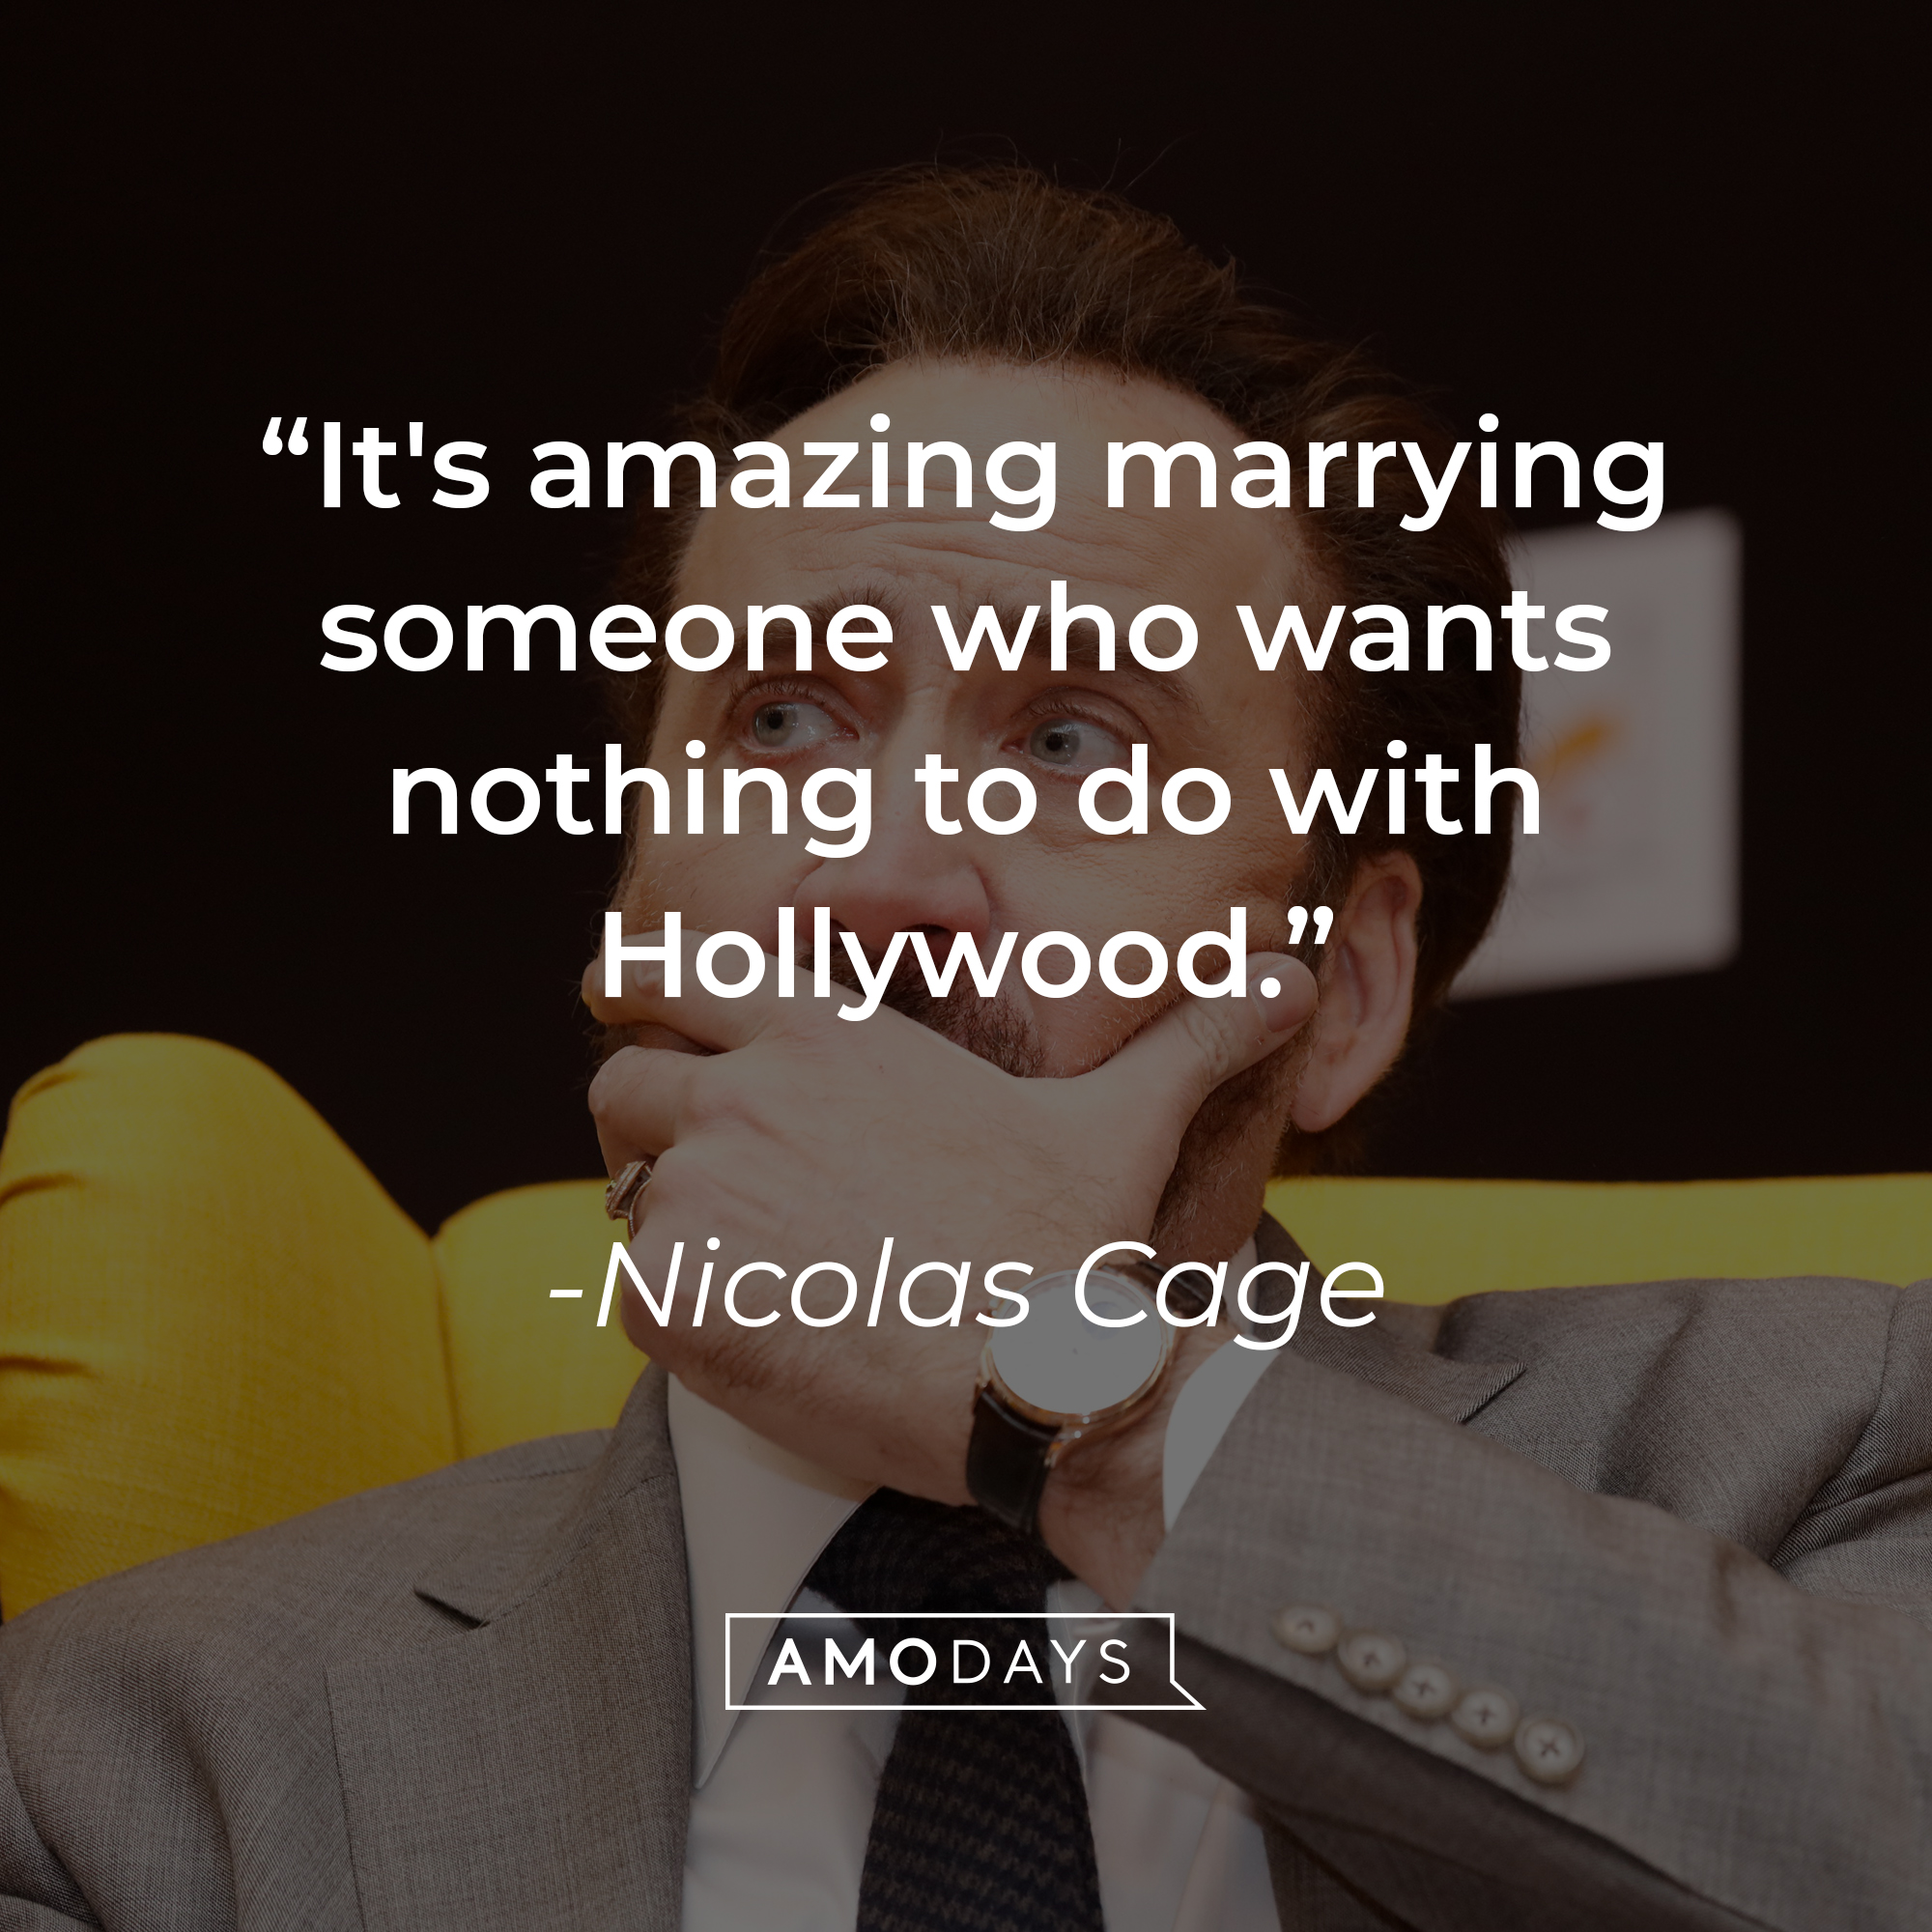 Nicolas Cage's quote: "It's amazing marrying someone who wants nothing to do with Hollywood." | Source: Getty Images